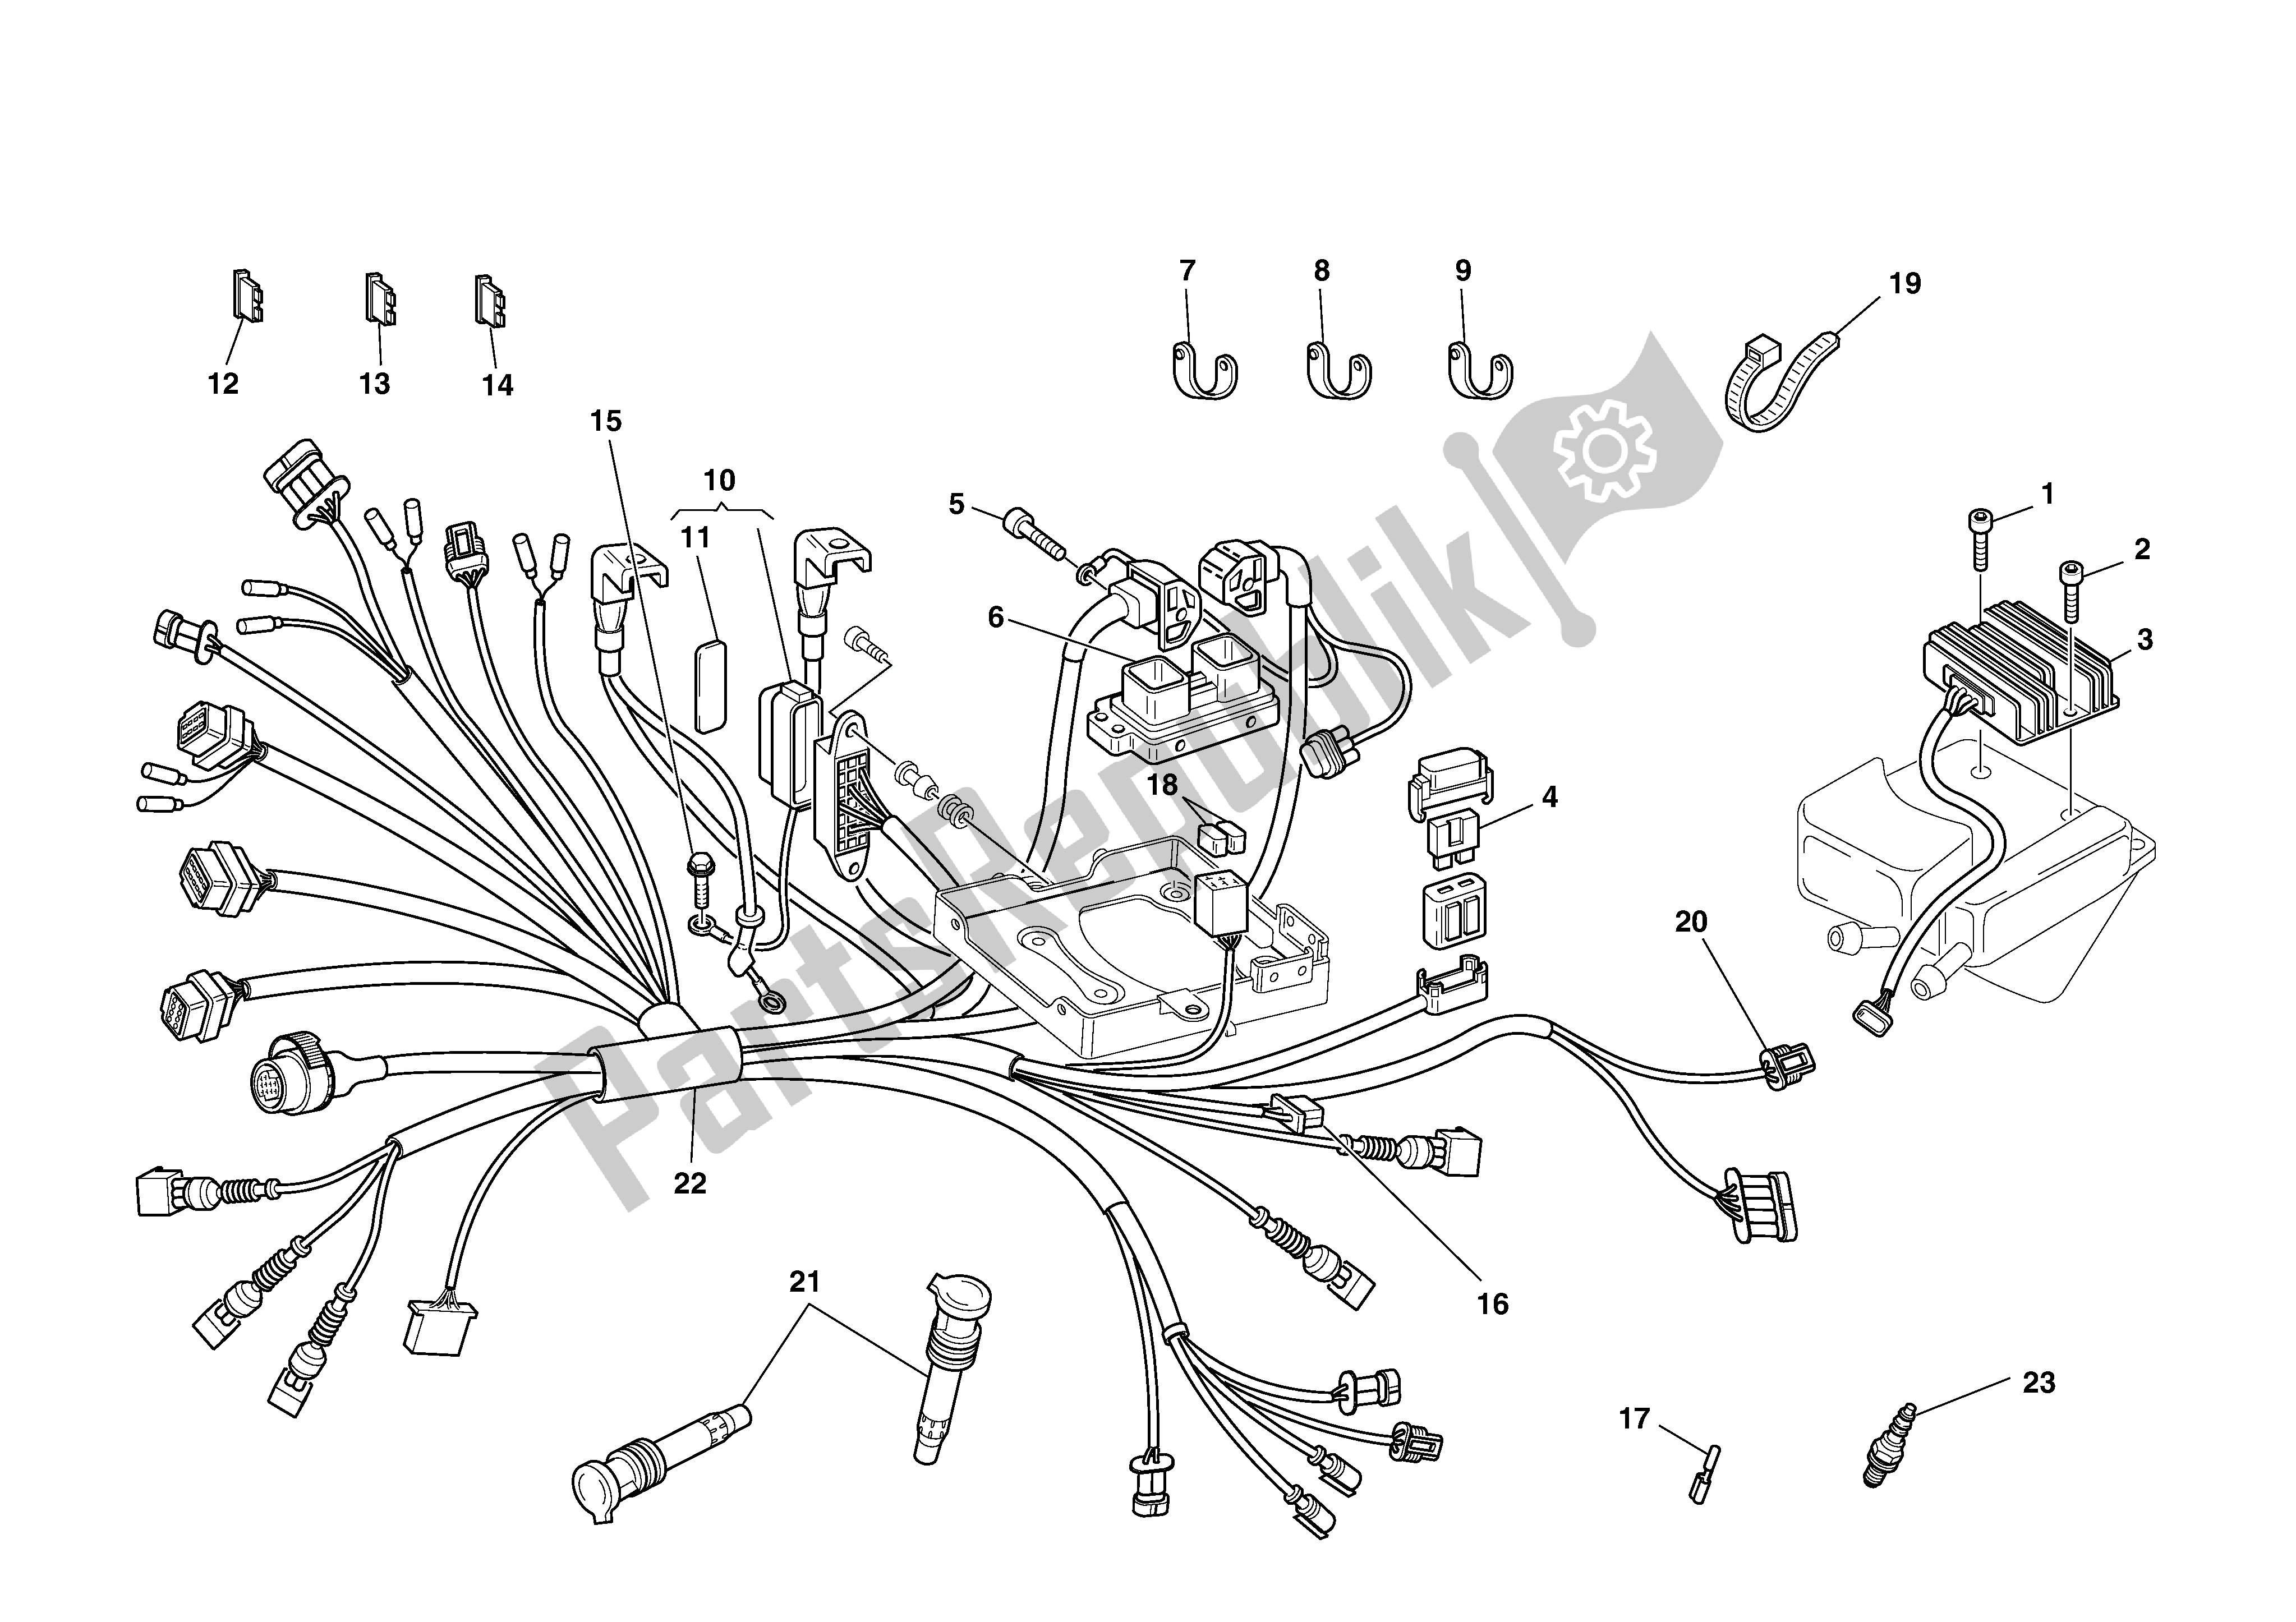 All parts for the Electric System of the Ducati Monster S4 916 2002